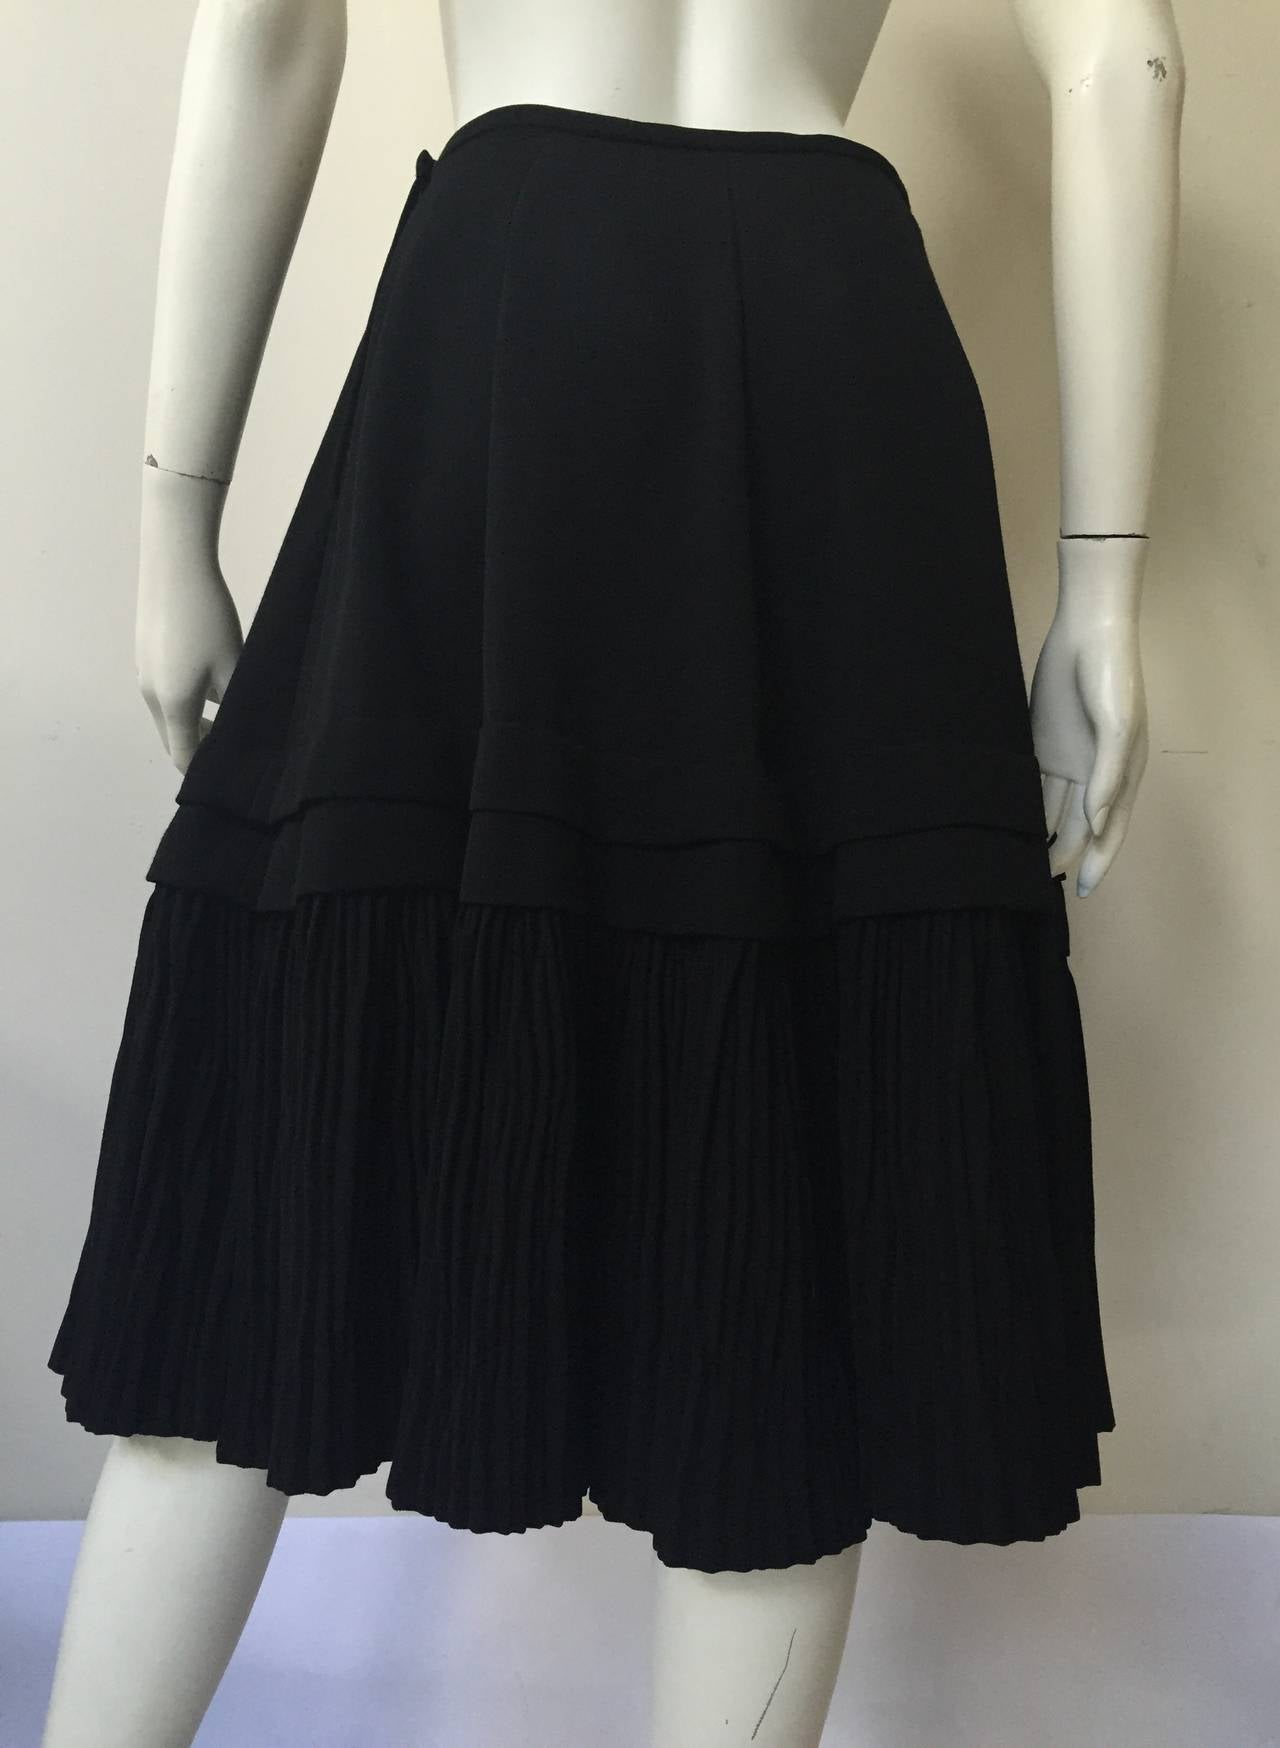 Comme des Garcons by Rei Kawakubo for Bergdorf Goodman skirt size medium. For Sale 1